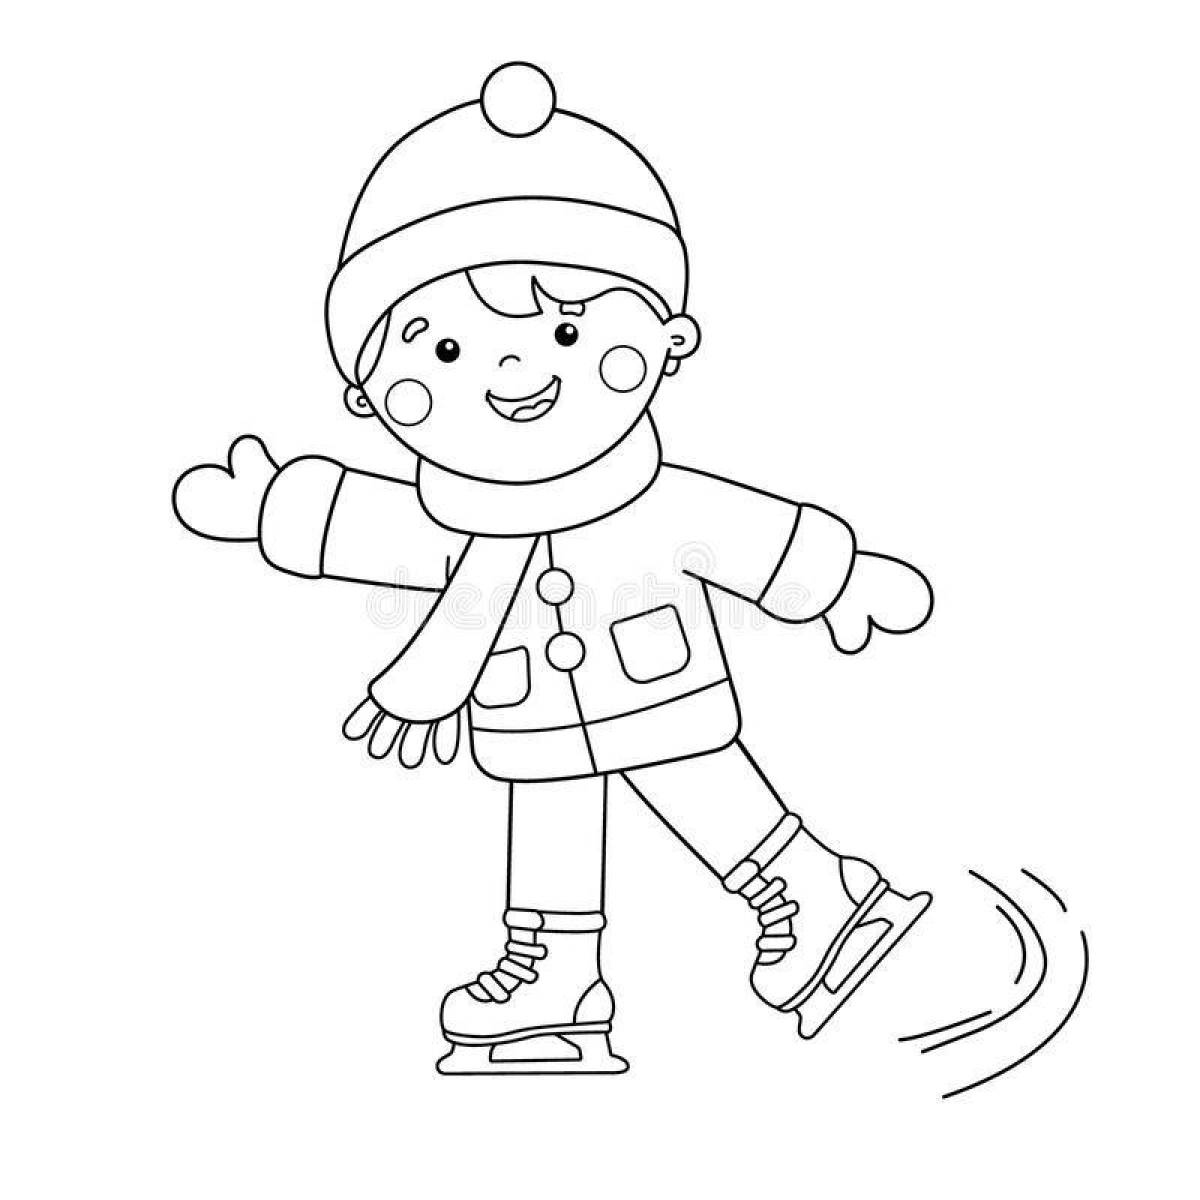 Elegant coloring book for children 3-4 years old winter sports